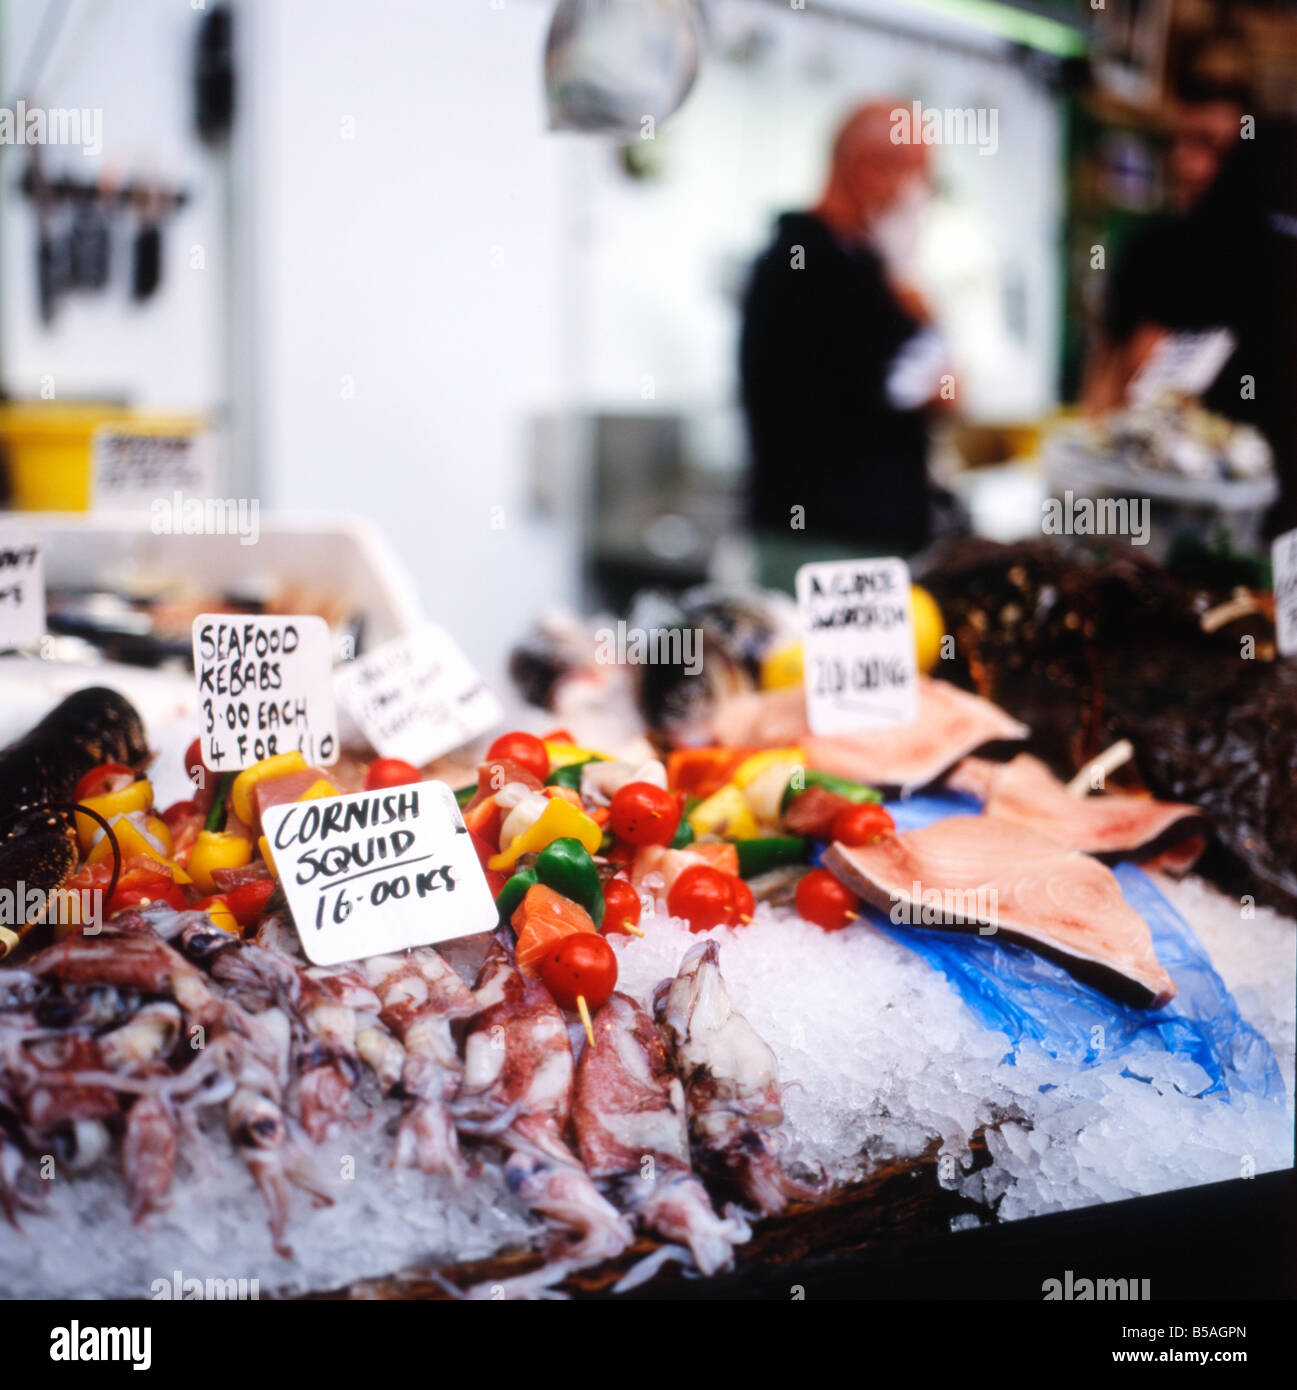 Cornish squid on a bed of ice for sale on a fresh fish seafood stall at Borough Market London Bridge Southwark in London England UK    KATHY DEWITT Stock Photo